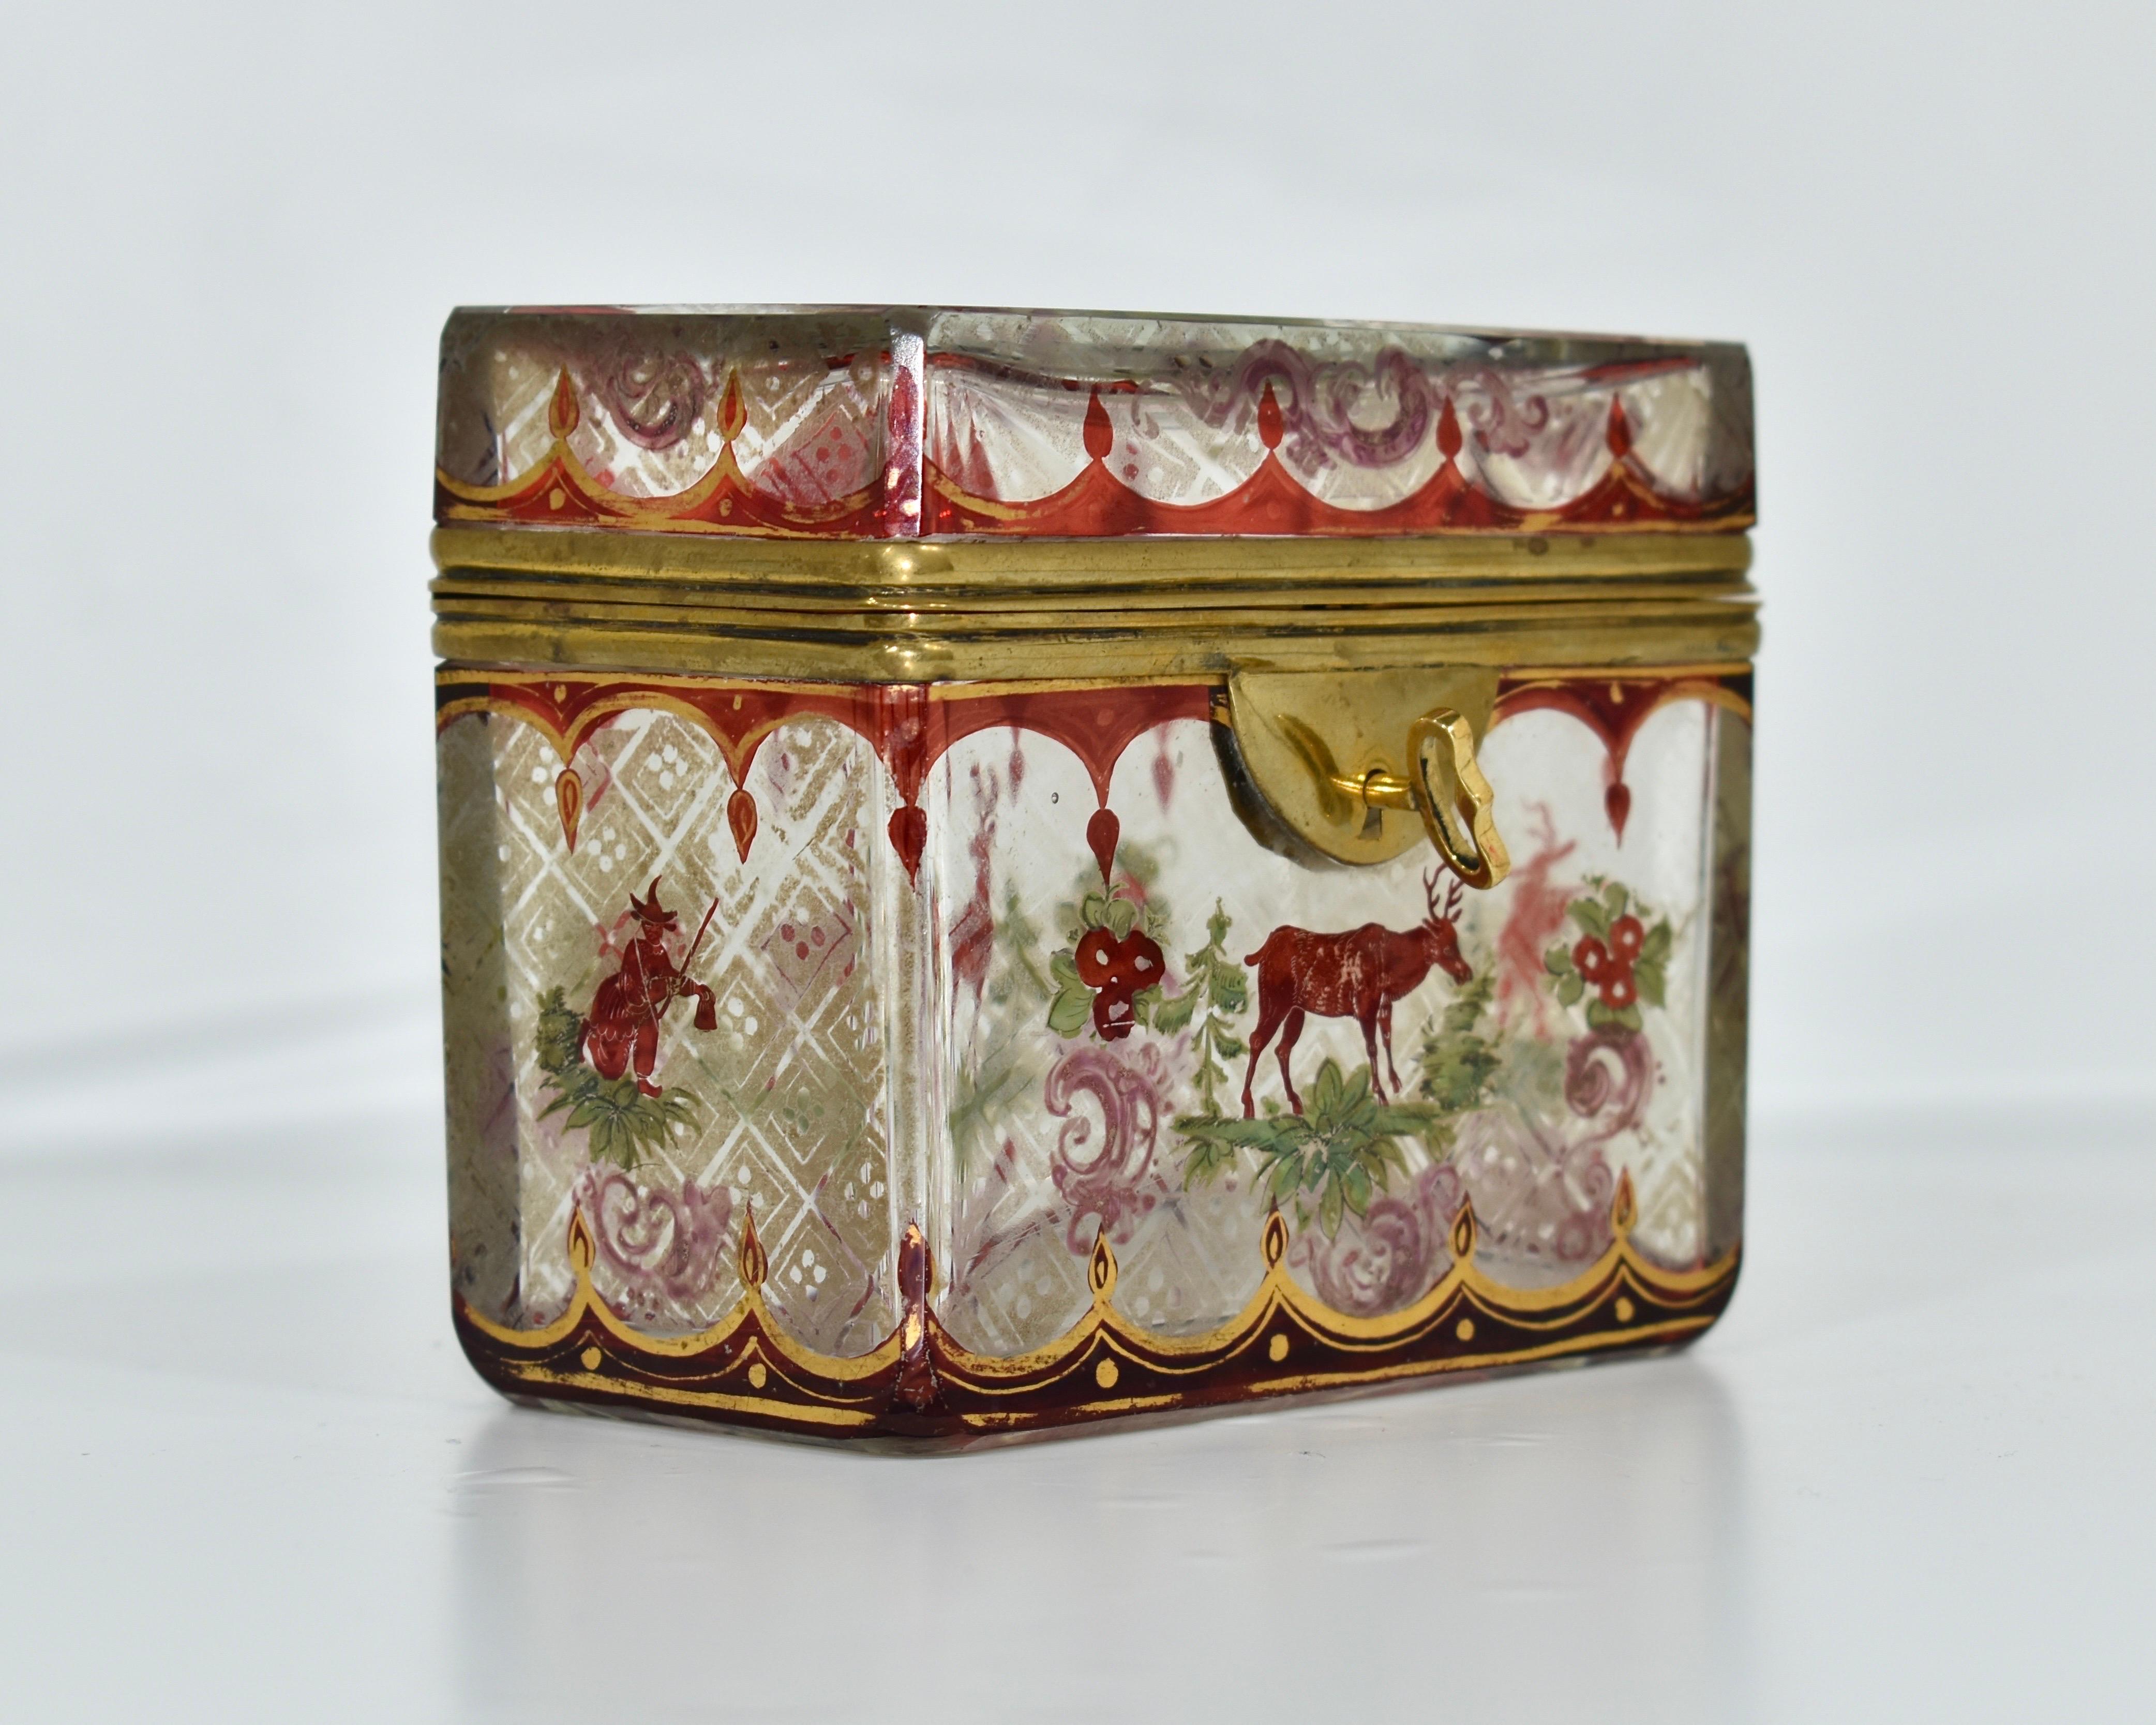 Fine Bohemian Clear and Ruby Red Glass Casket Jewelry Box with Hinged Bronze Mounts

Lid is Framed in Dore Bronze

Generously Decorated all Around with Gilded Enamel and Hunting Scenes

Original Key is Available

Bohemia, Moser, 19th century.